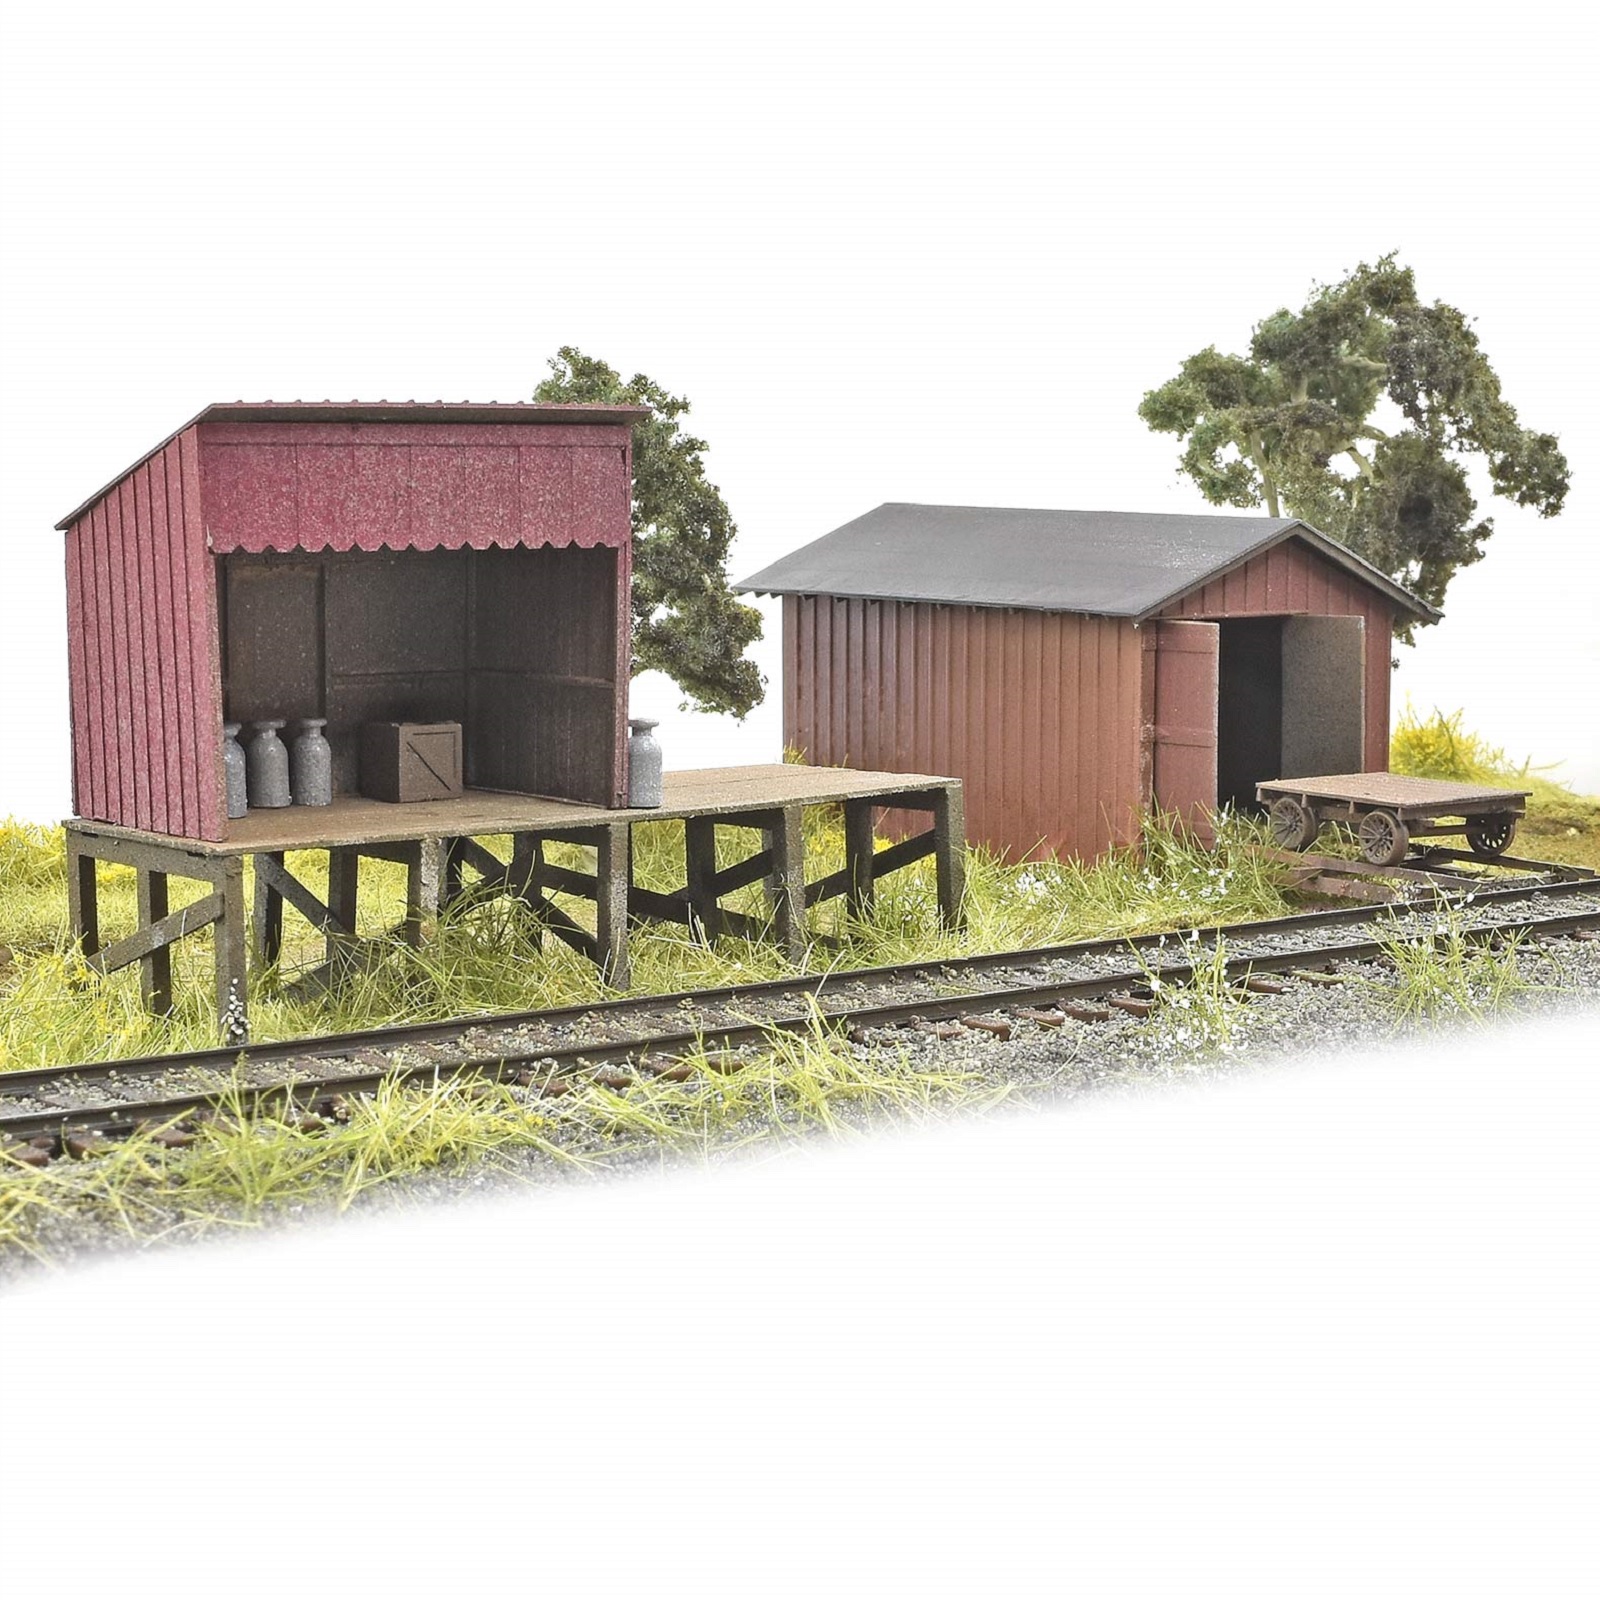 #7017 & Milk Station w/80 Cans #7011 Tichy Train Group #7018 HO Handcar Shed 